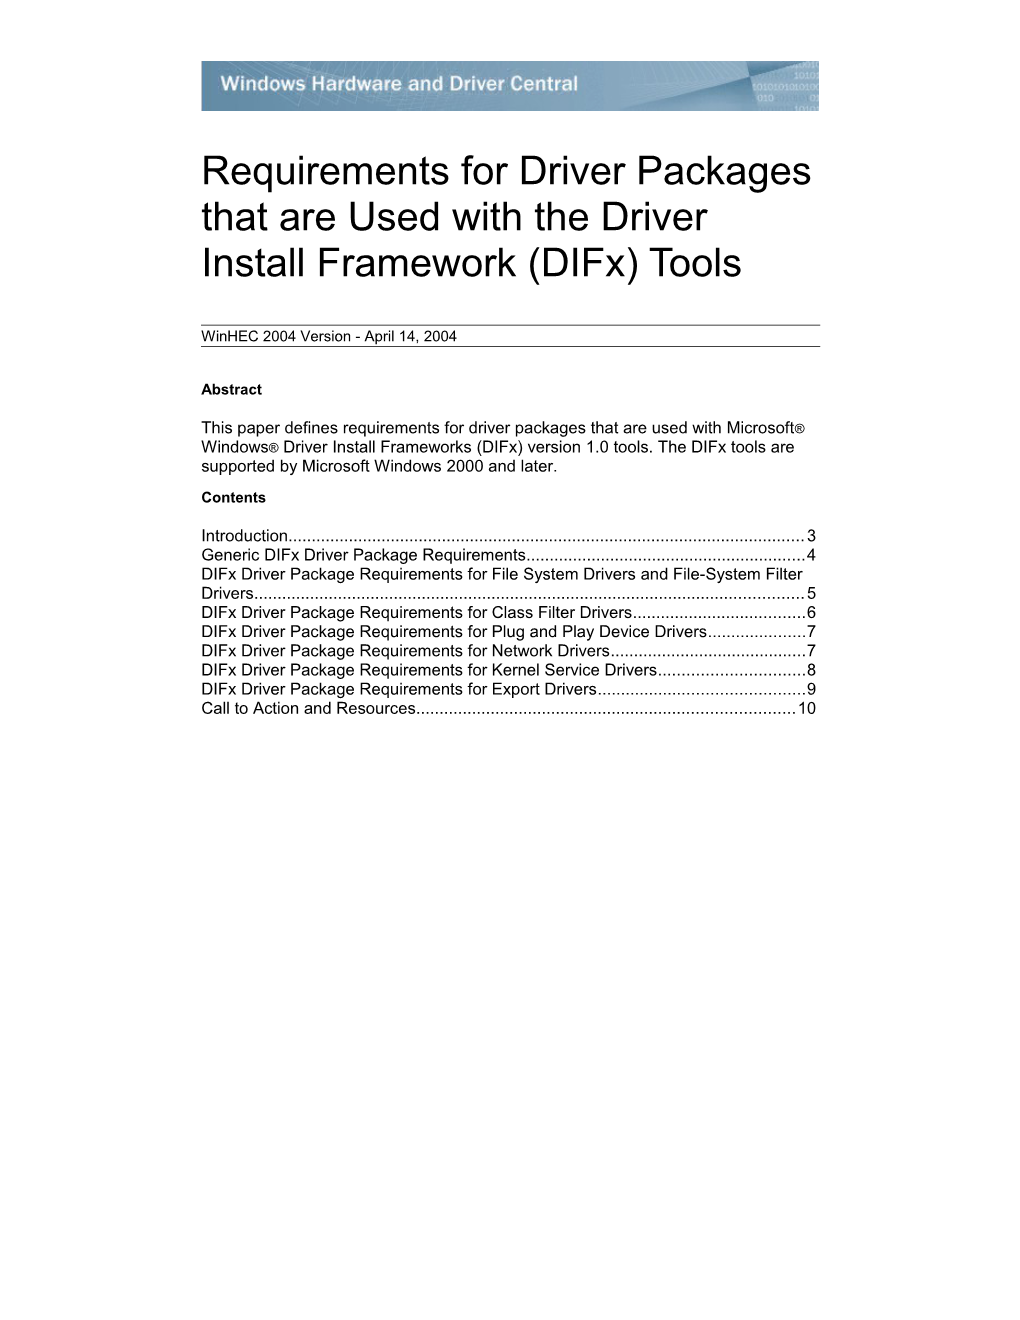 Requirements for Driver Packages That Are Used with the Driver Install Framework (Difx) Tools